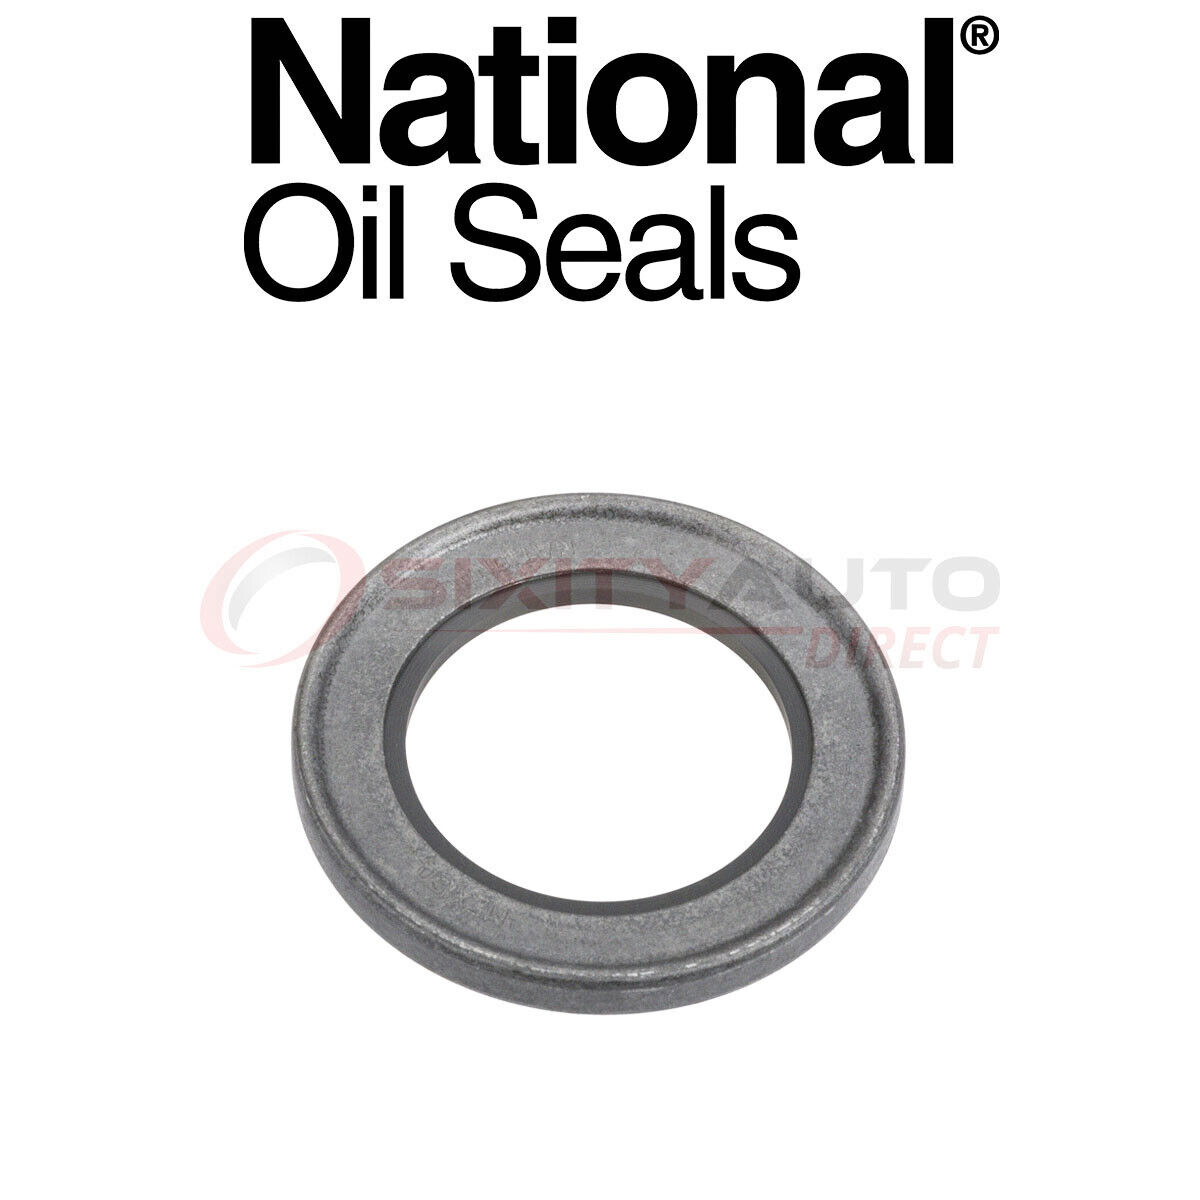 National Wheel Seal for 1965-1969 Chevrolet Corvair 2.7L H6 - Axle Hub Tire gl